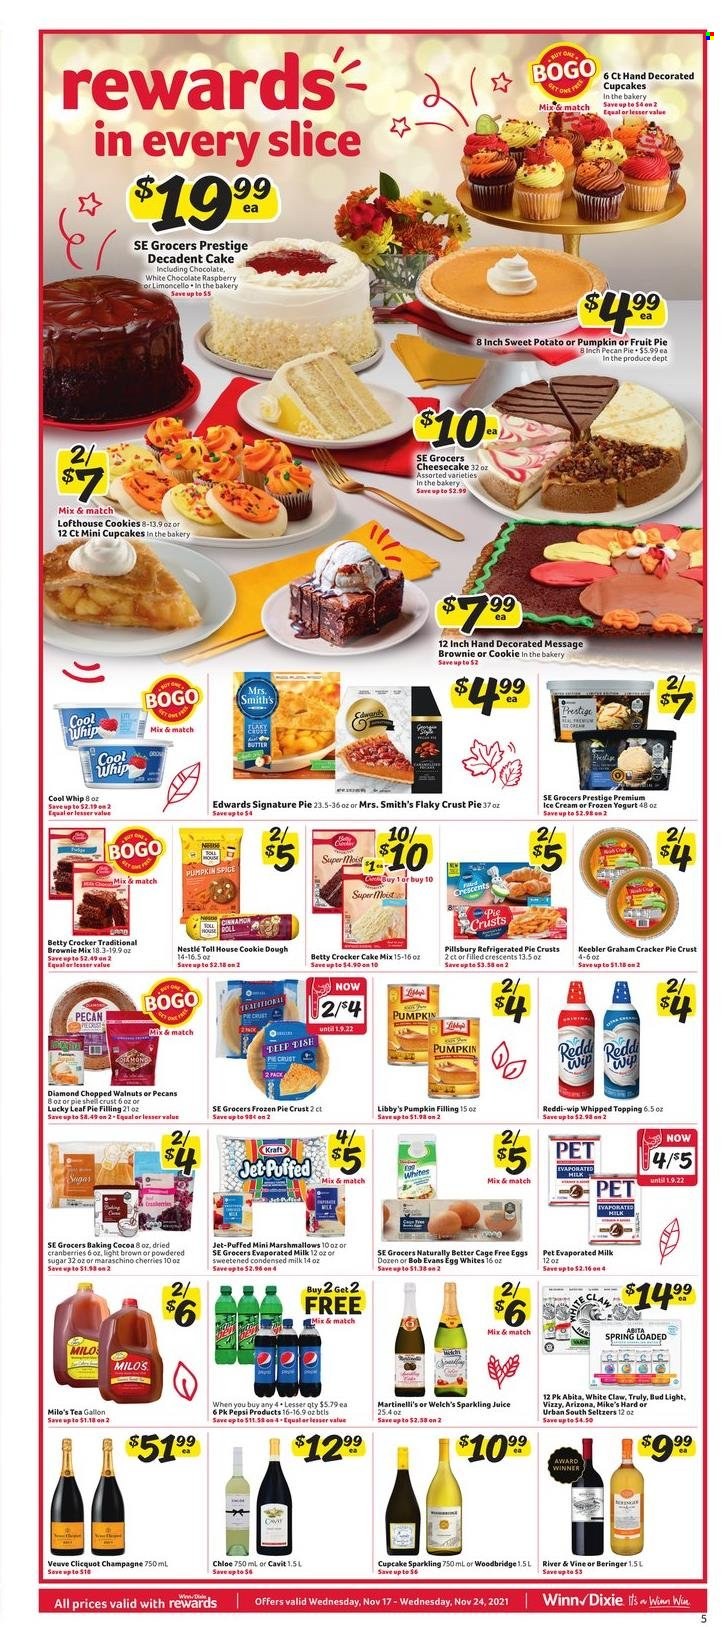 thumbnail - Winn Dixie Flyer - 11/17/2021 - 11/24/2021 - Sales products - cupcake, brownie mix, cake mix, sweet potato, Welch's, Pillsbury, Kraft®, Bob Evans, yoghurt, evaporated milk, condensed milk, eggs, cage free eggs, butter, Cool Whip, ice cream, cookie dough, cookies, marshmallows, Nestlé, crackers, Keebler, Smith's, cocoa, sugar, pie crust, pie filling, topping, icing sugar, cranberries, Maraschino cherries, spice, pecans, dried fruit, Pepsi, juice, AriZona, sparkling juice, tea, champagne, Veuve Clicquot, Woodbridge, Limoncello, White Claw, TRULY, beer, Bud Light, Jet, Chloé, mouse. Page 5.